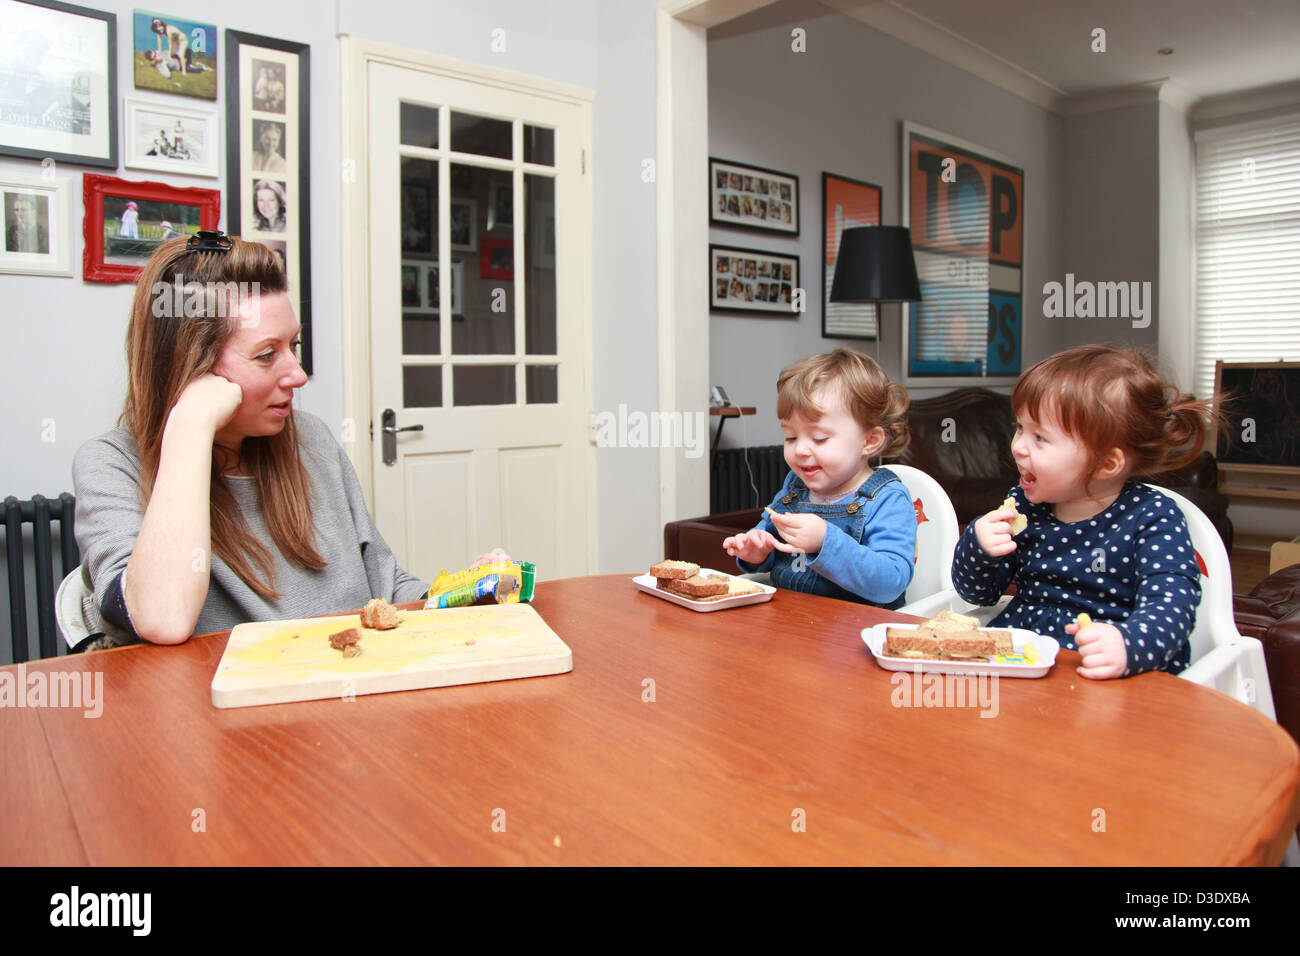 Mum feeding year old twin girls at the table. Stock Photo